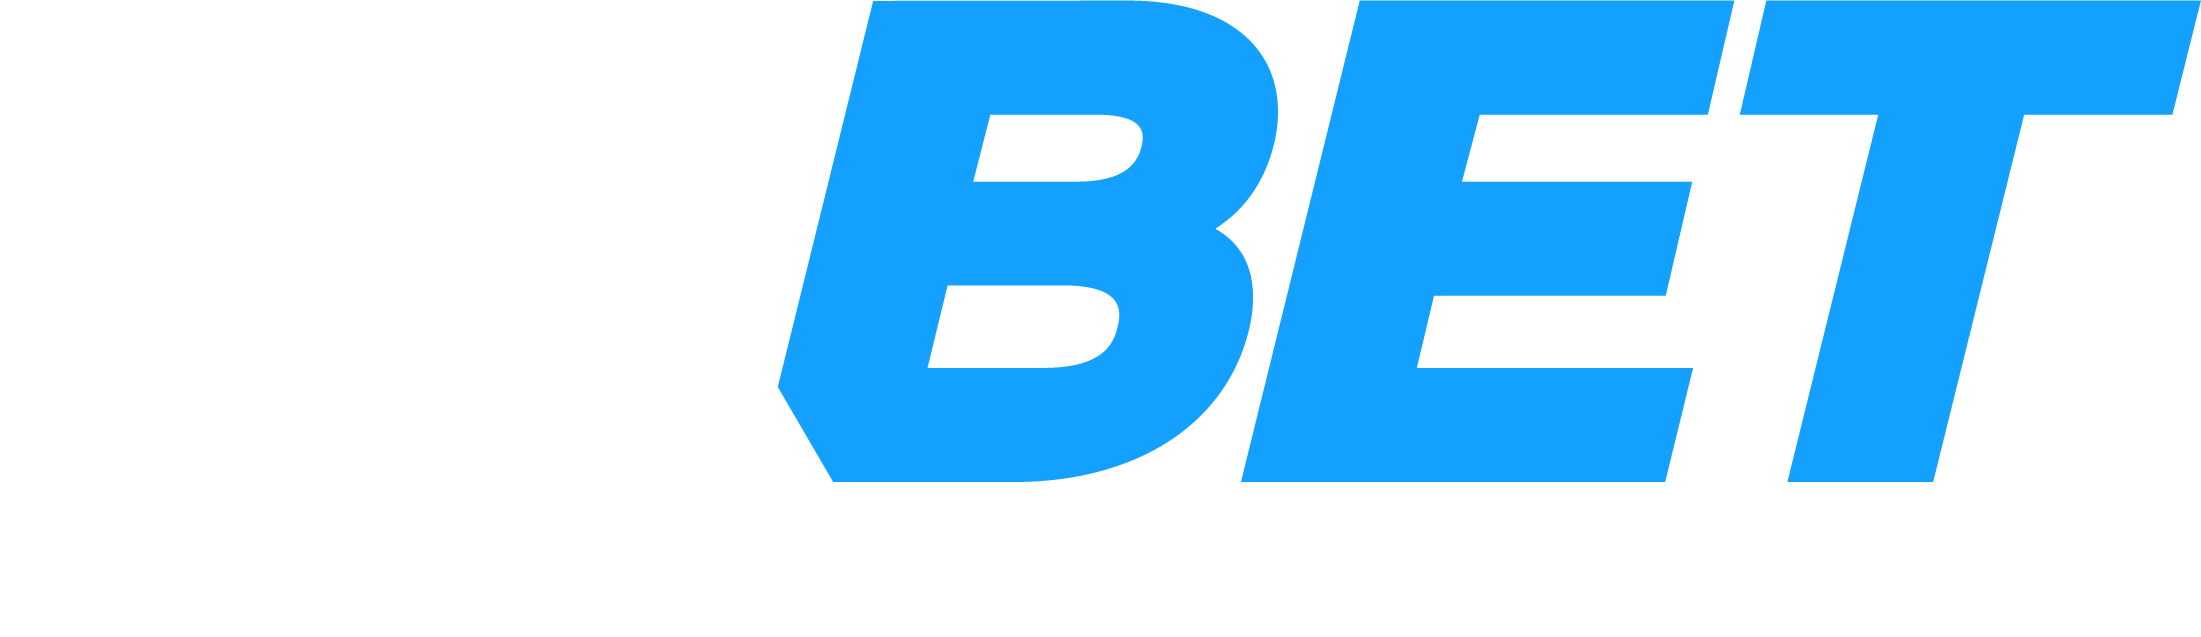 Visit the live casino on 1xBet